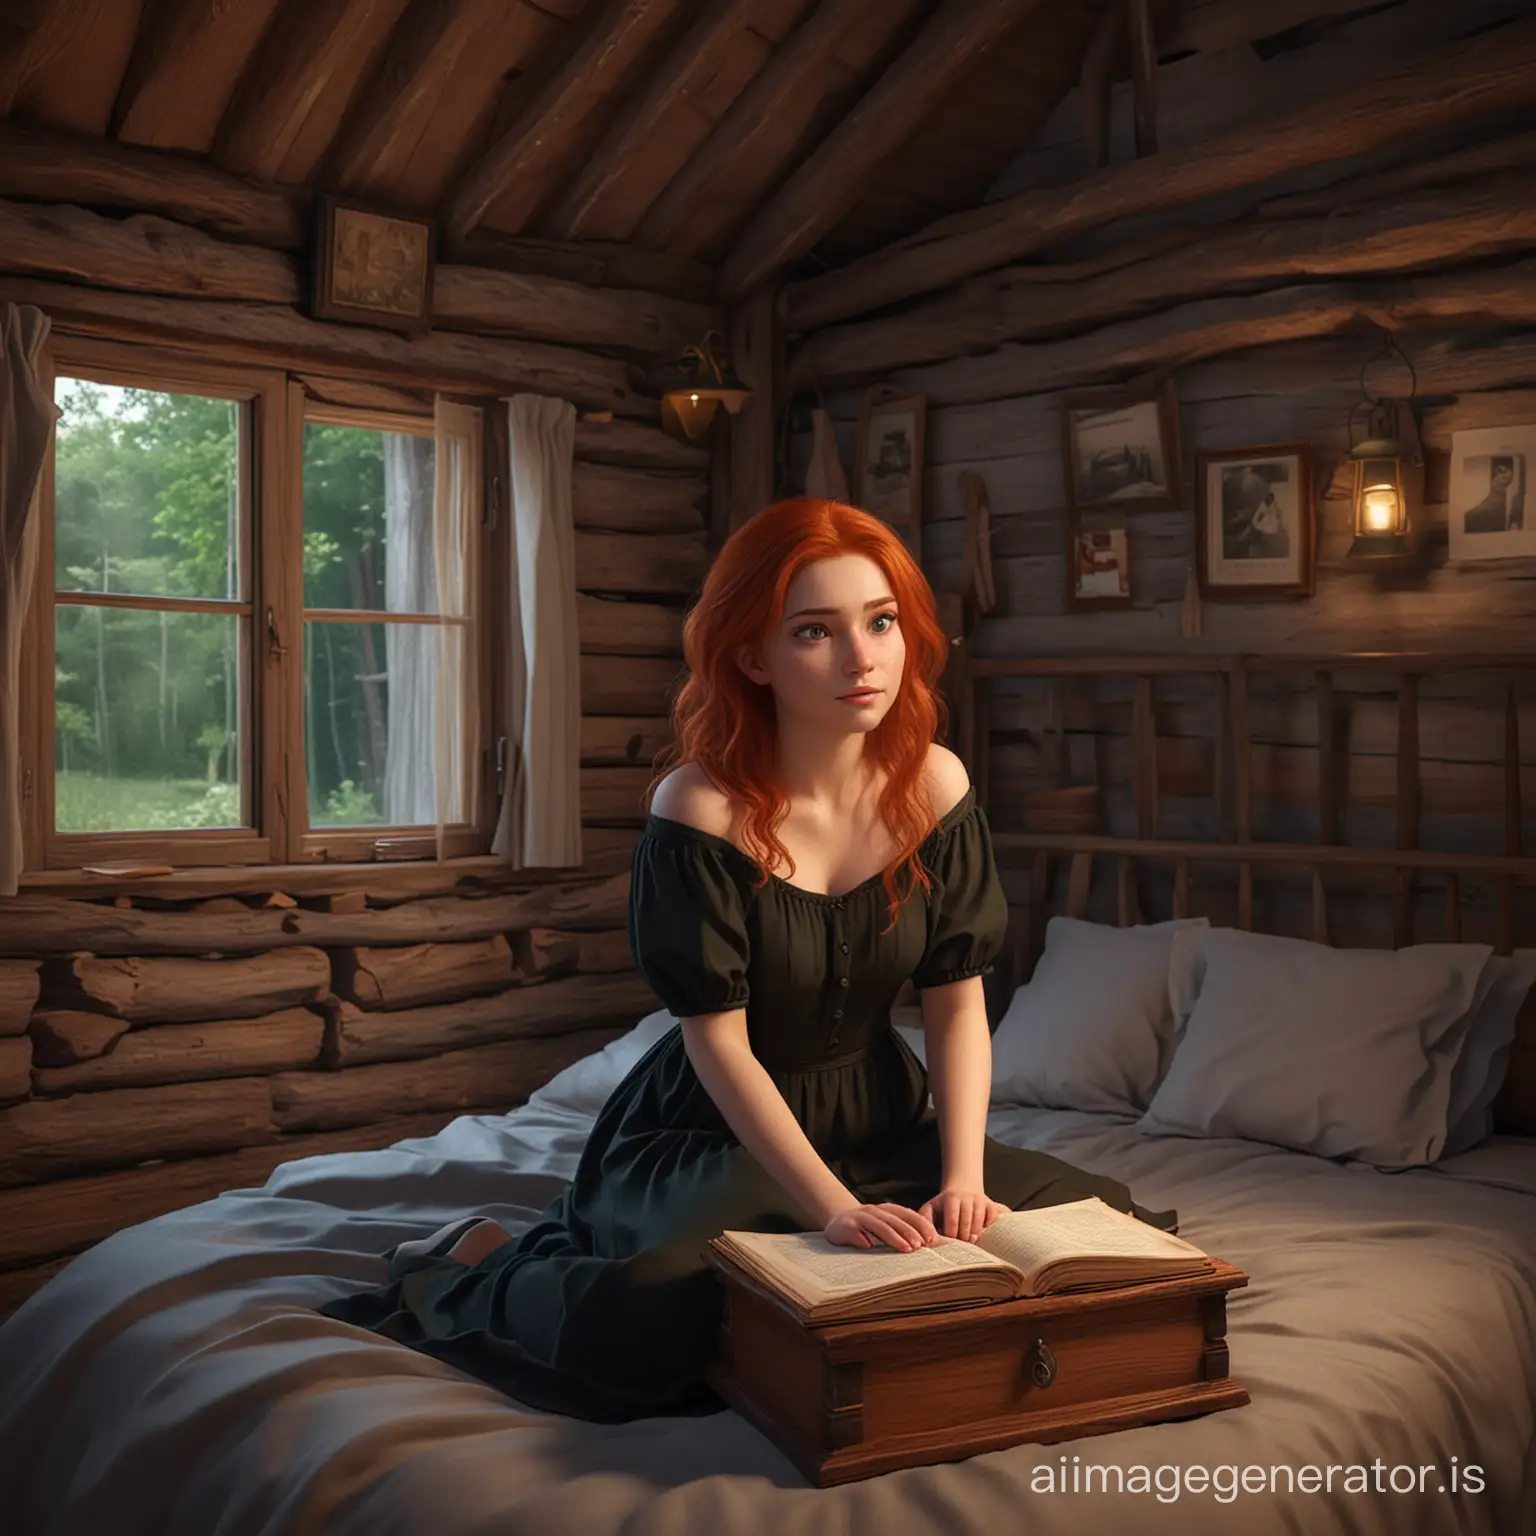 Enchanting-RedHaired-Woman-in-Black-Dress-Discovers-Mysterious-Tome-in-Rustic-Cabin-Setting